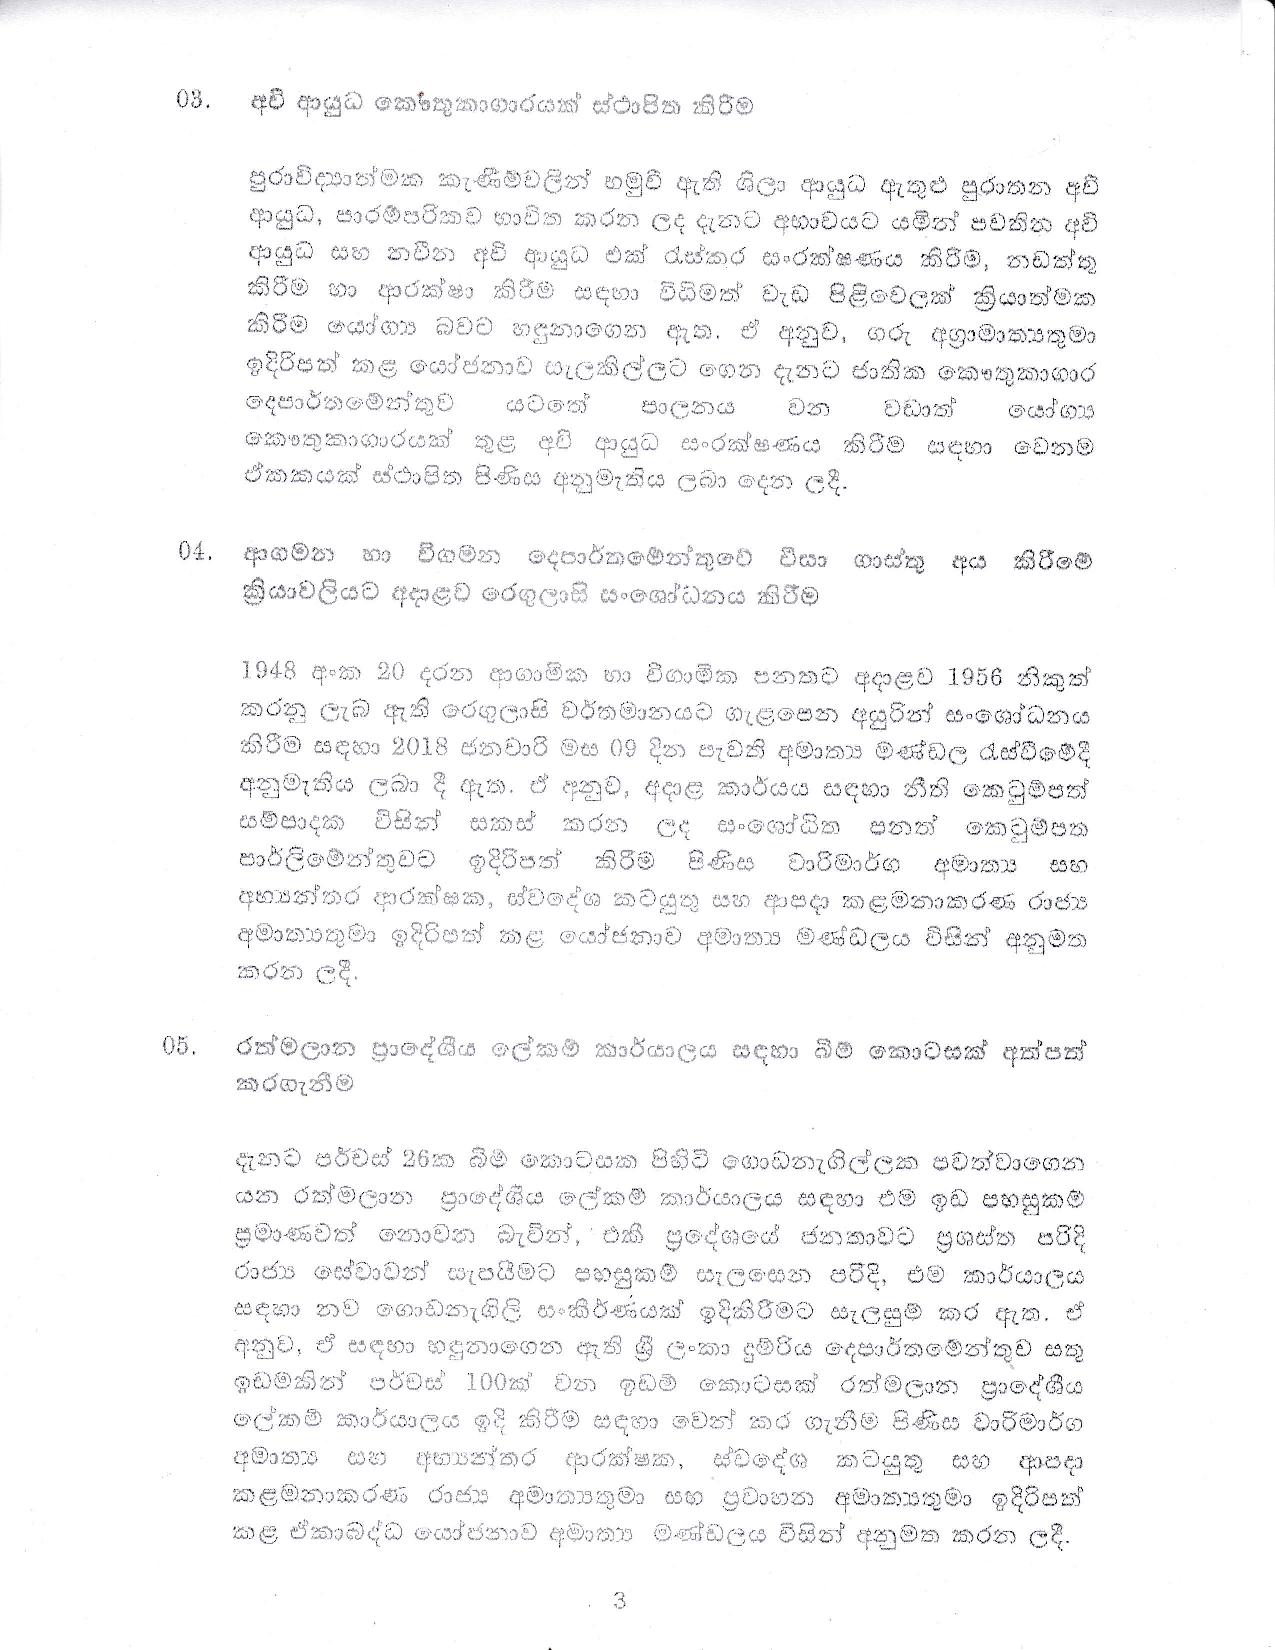 Cabinet Decision on 16.11.2020 page 003